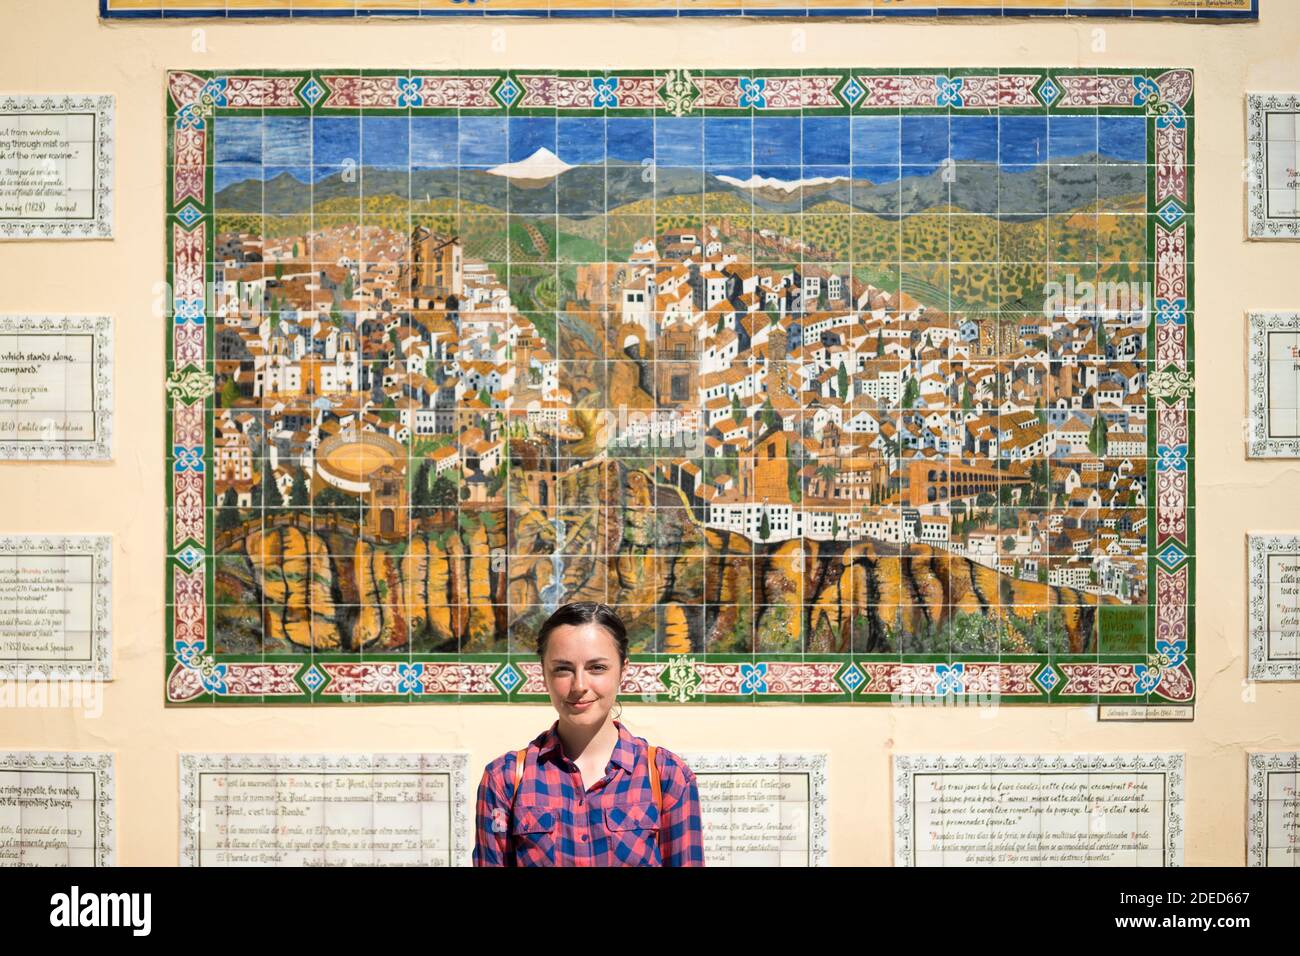 Woman in front mosaic map of Ronda, Andalusia, Spain Stock Photo